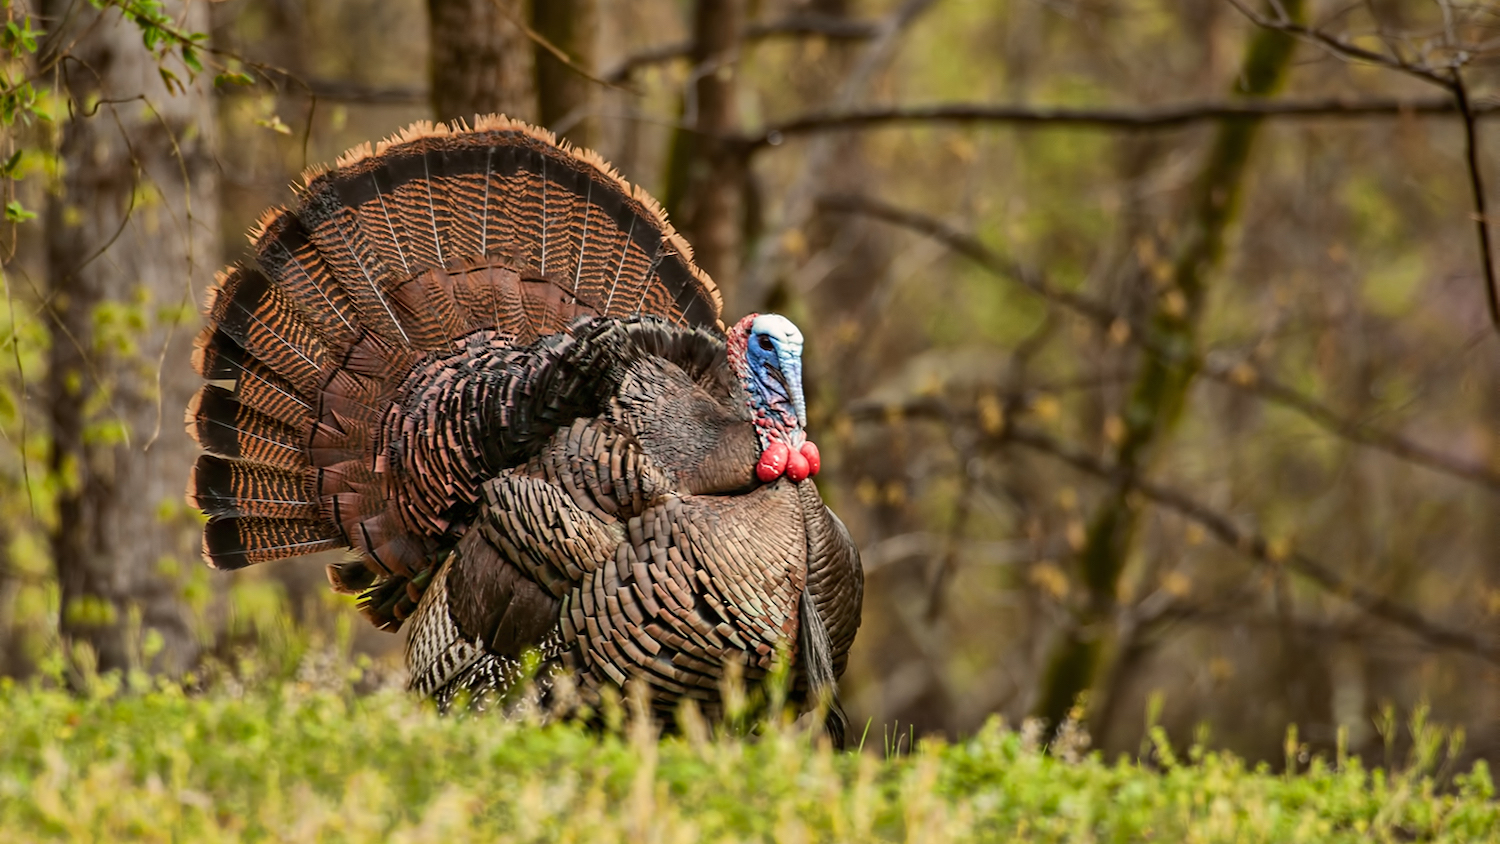 Wild turkey - Talking Turkey: How the Bird Made a Comeback in North Carolina - Forestry and Environmental Resources NC State University